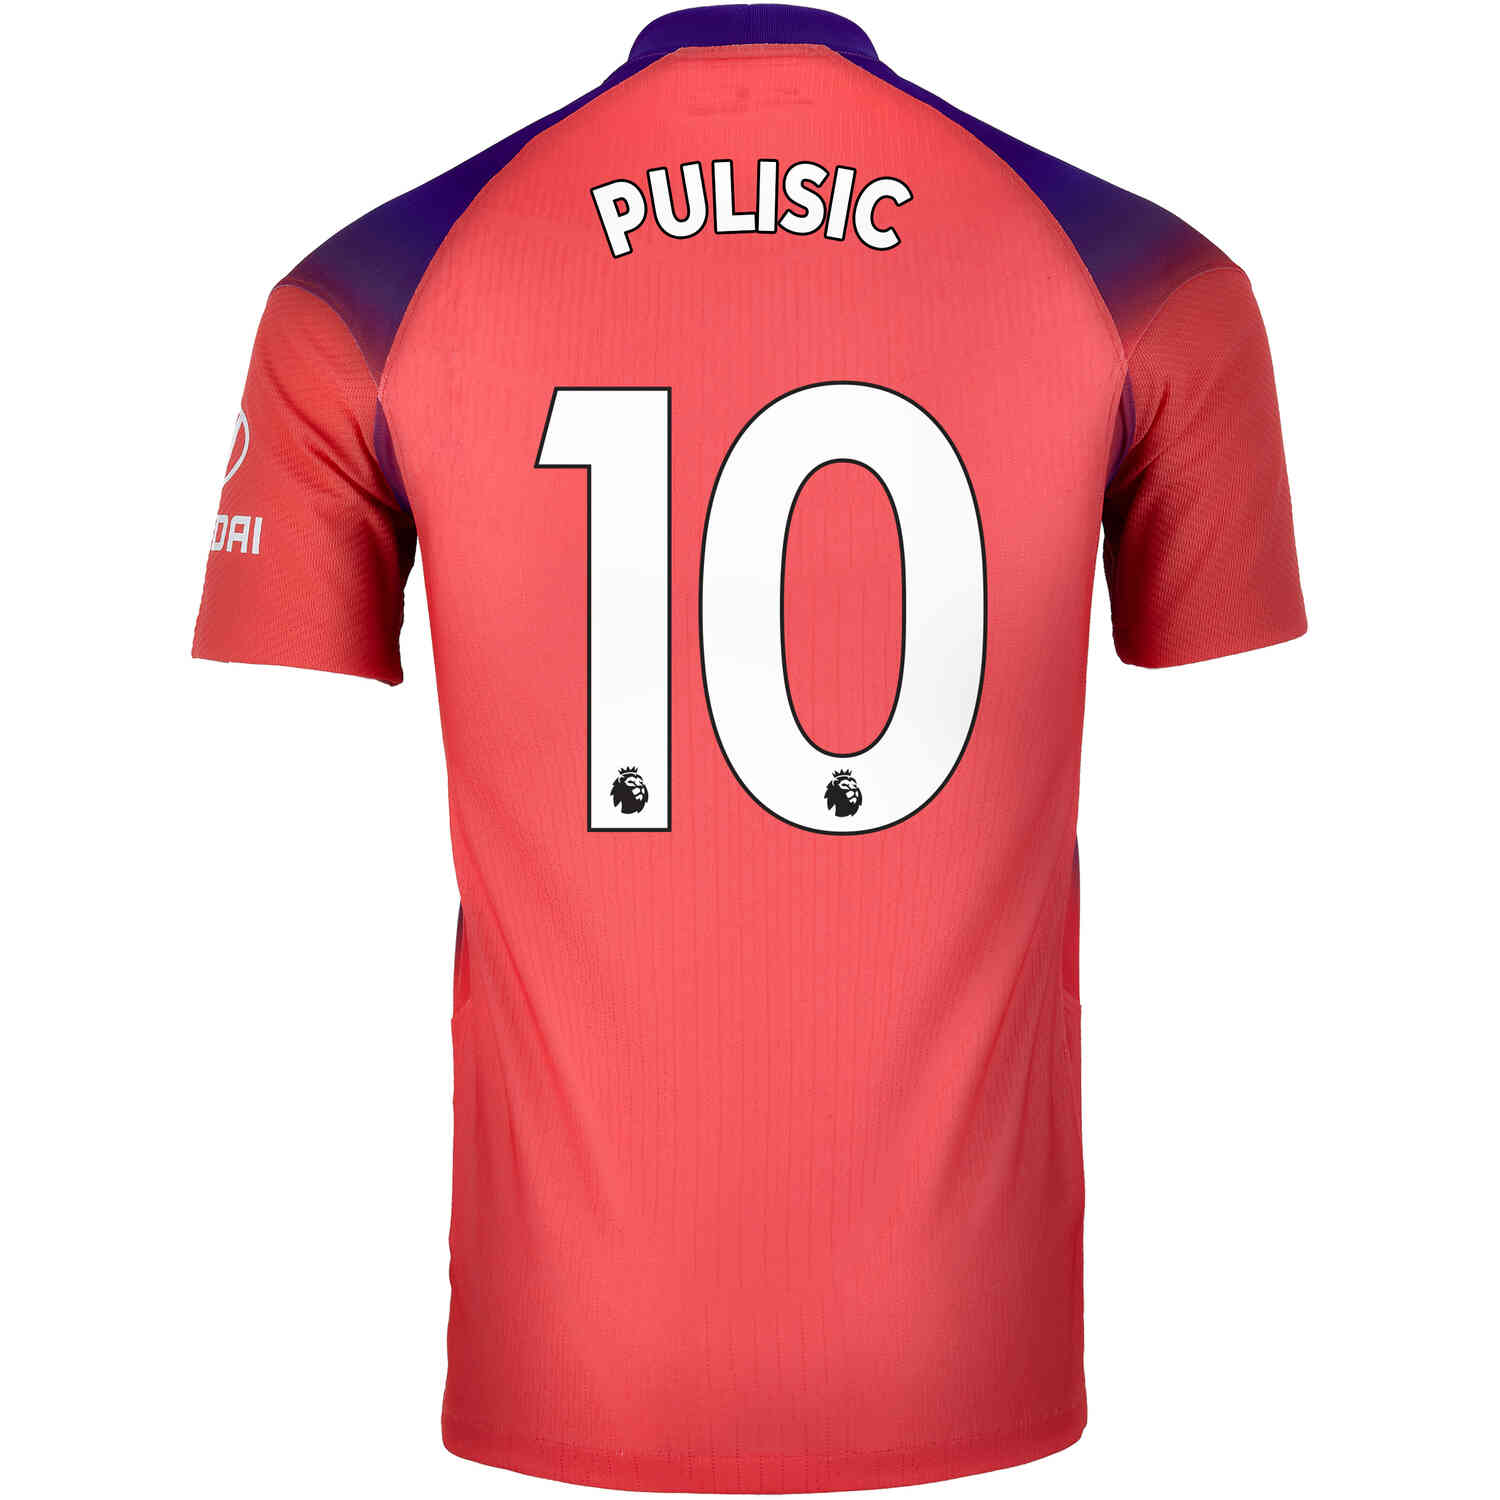 2020/21 Christian Pulisic Chelsea 3rd Match Jersey - Soccer Master